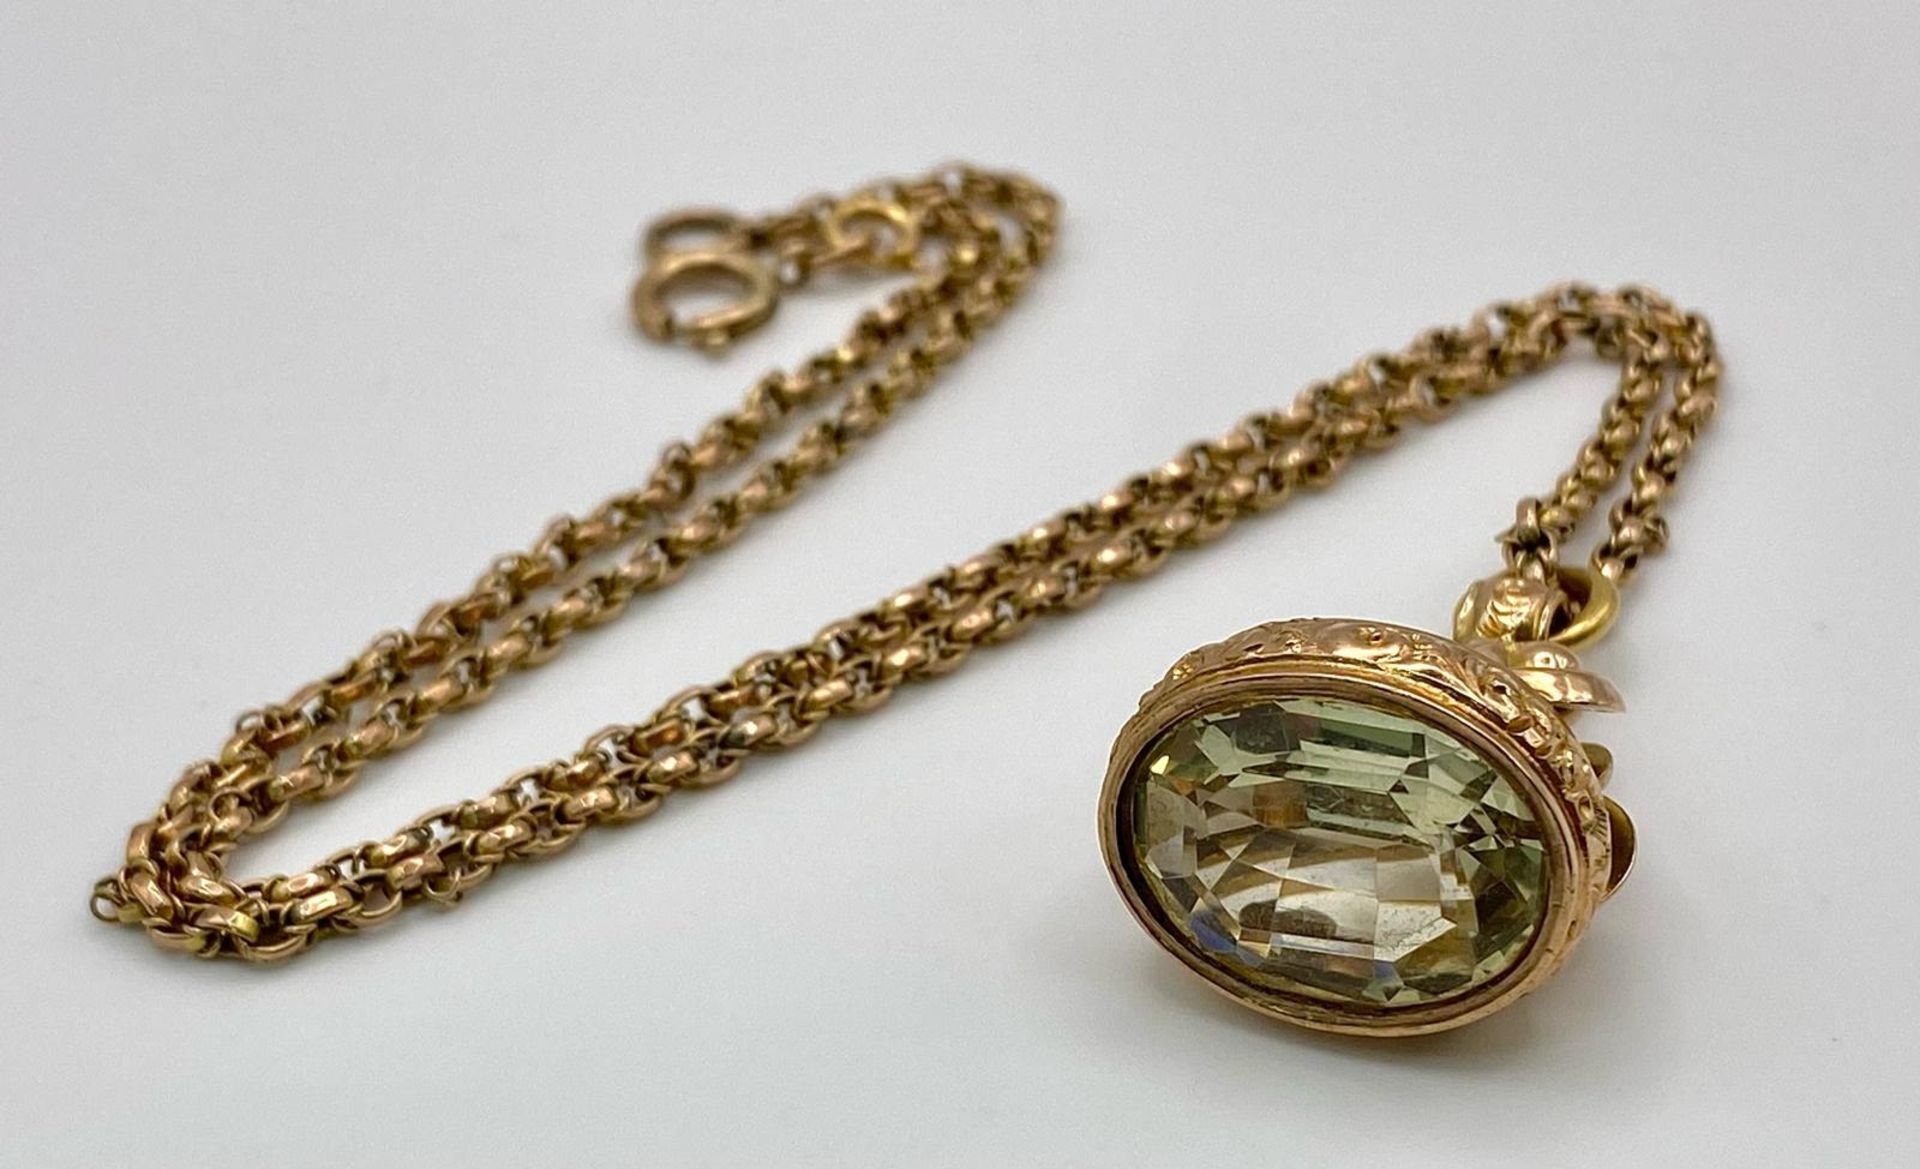 An Antique 9K Gold Fob Seal Citrine Gemstone Pendant on a 9K Gold Chain. Pendant - 3cm. Chain -